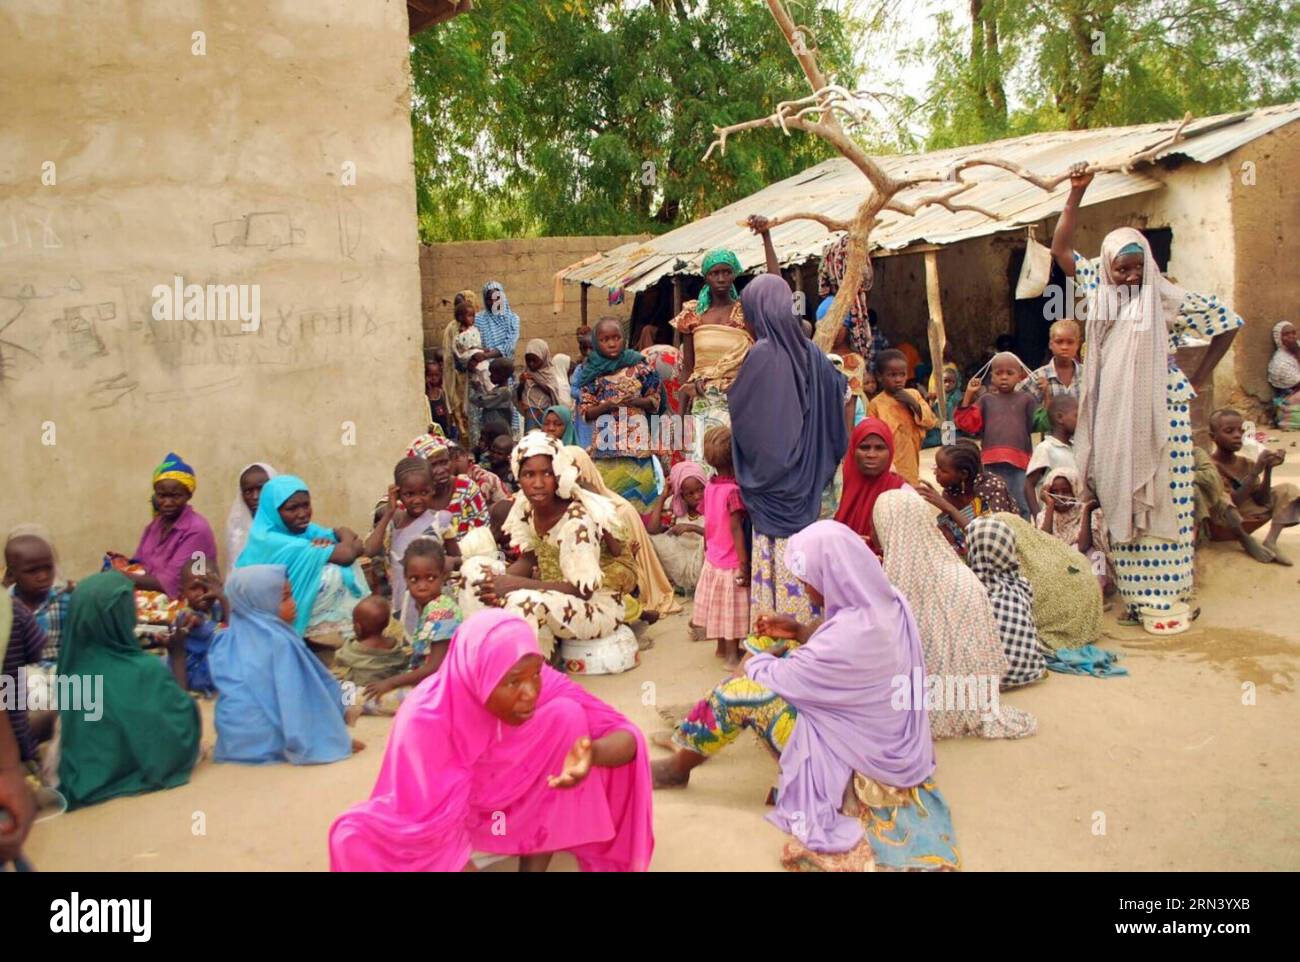 (150430) -- SAMBISA, April 30, 2015 -- Some of the rescued hostages by the Nigerian troops are seen at a camp in Sambisa forest, North-Eastern Nigeria, April 30, 2015. Up to 300 unidentified females have been rescued by Nigerian troops in restive northeast Sambisa forest following a daring and precise operation, a military spokesperson said on Tuesday. ) NIGERIA-SAMBISA-HOSTAGES-RESCUE Dare PUBLICATIONxNOTxINxCHN   April 30 2015 Some of The Rescued Hostages by The Nigerian Troops are Lakes AT a Camp in  Forest North Eastern Nigeria April 30 2015 up to 300 unidentified females have been Rescued Stock Photo